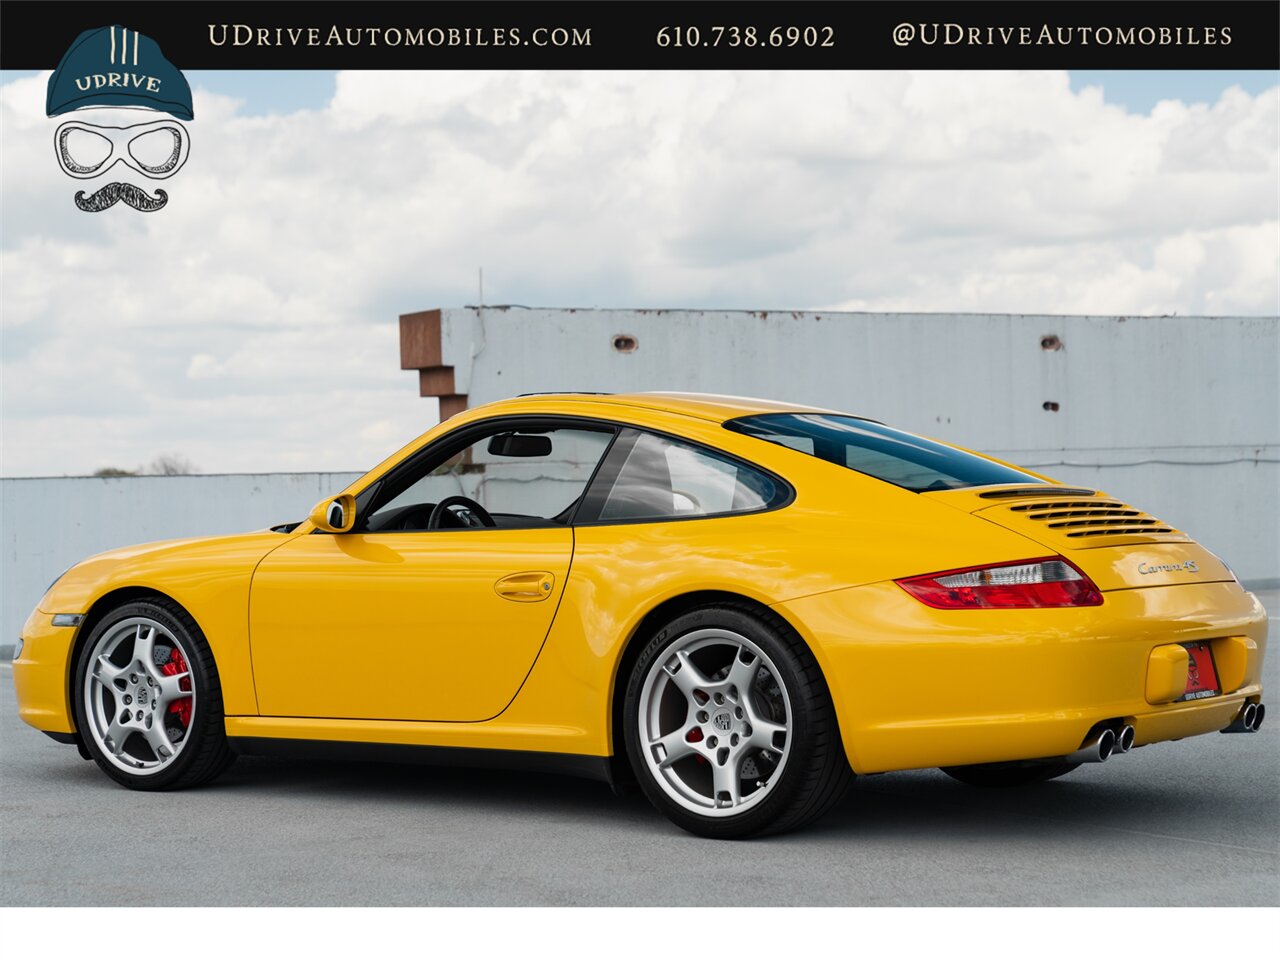 2006 Porsche 911 Carrera 4S  997 C4S 6 Speed Cocoa Full Lthr Chrono Sport Exhaust Special Color Combo - Photo 23 - West Chester, PA 19382